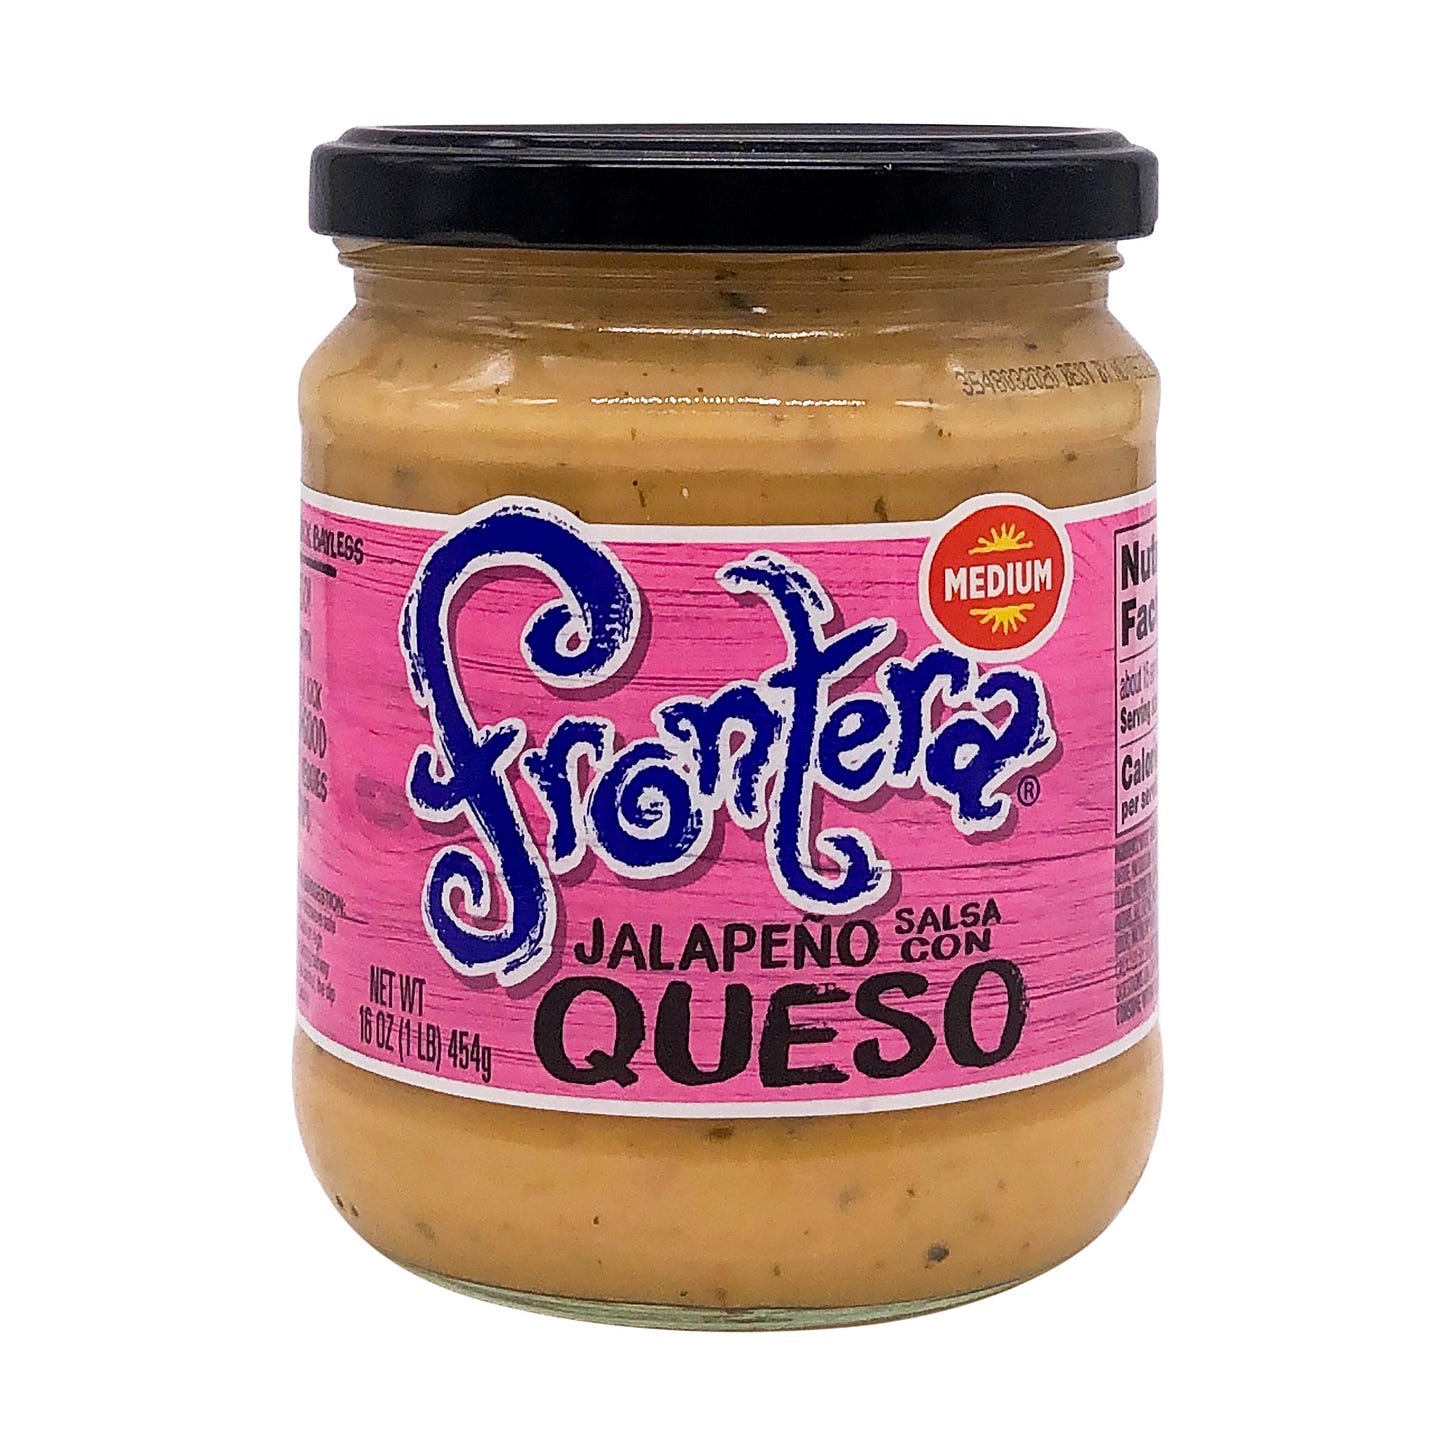 Queso With Jalapeno, 16 oz at Whole Foods Market